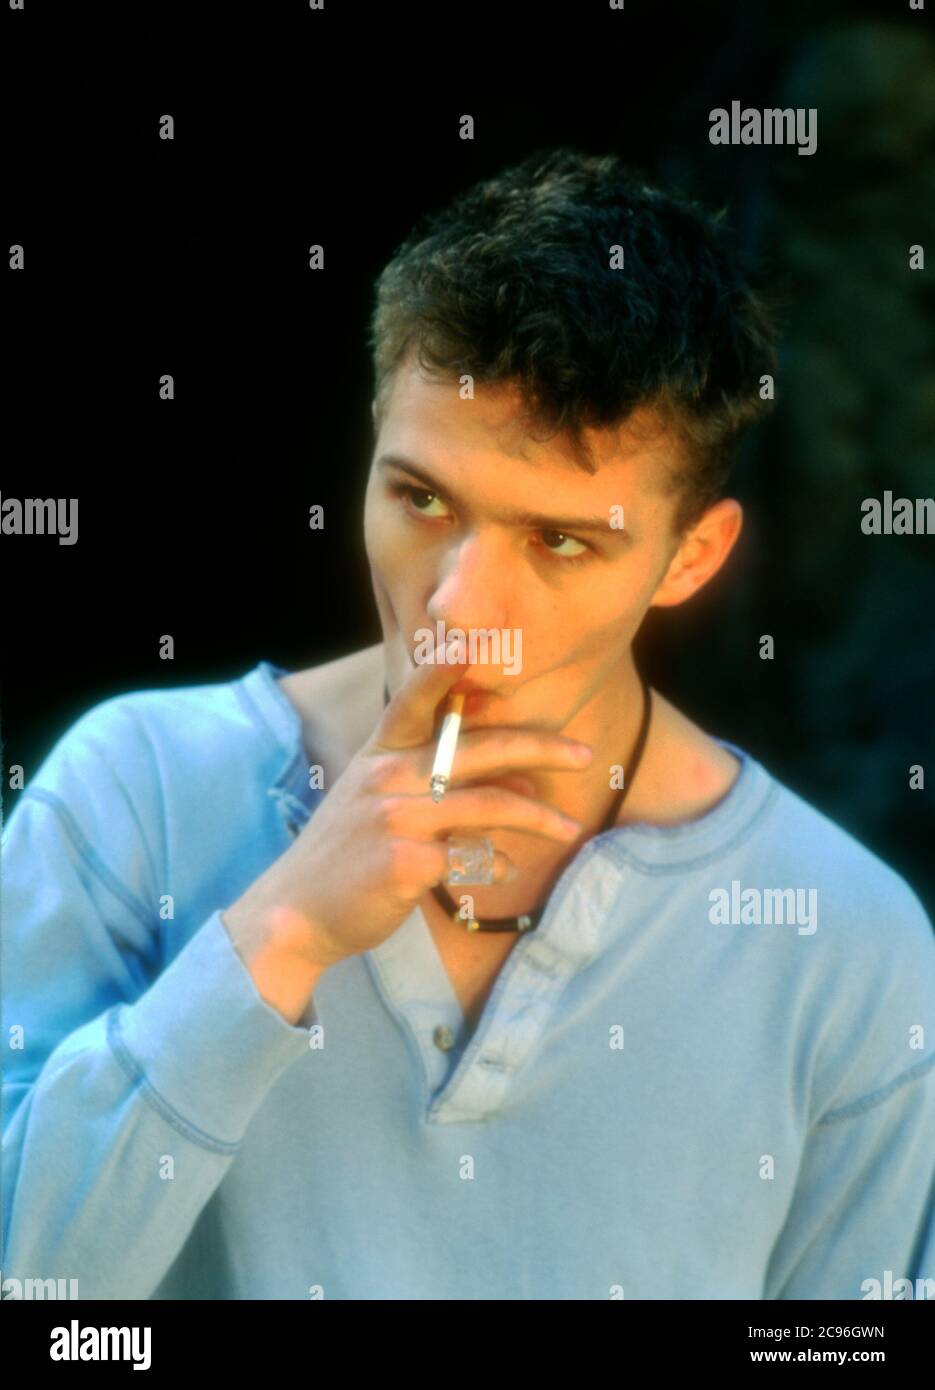 Los Angeles, California, USA 13th February 1996 (Exclusive) Actor Ryan Phillippe poses at a photo shoot on February 13, 1996 in Los Angeles, California, USA. Photo by Barry King/Alamy Stock Photo Stock Photo